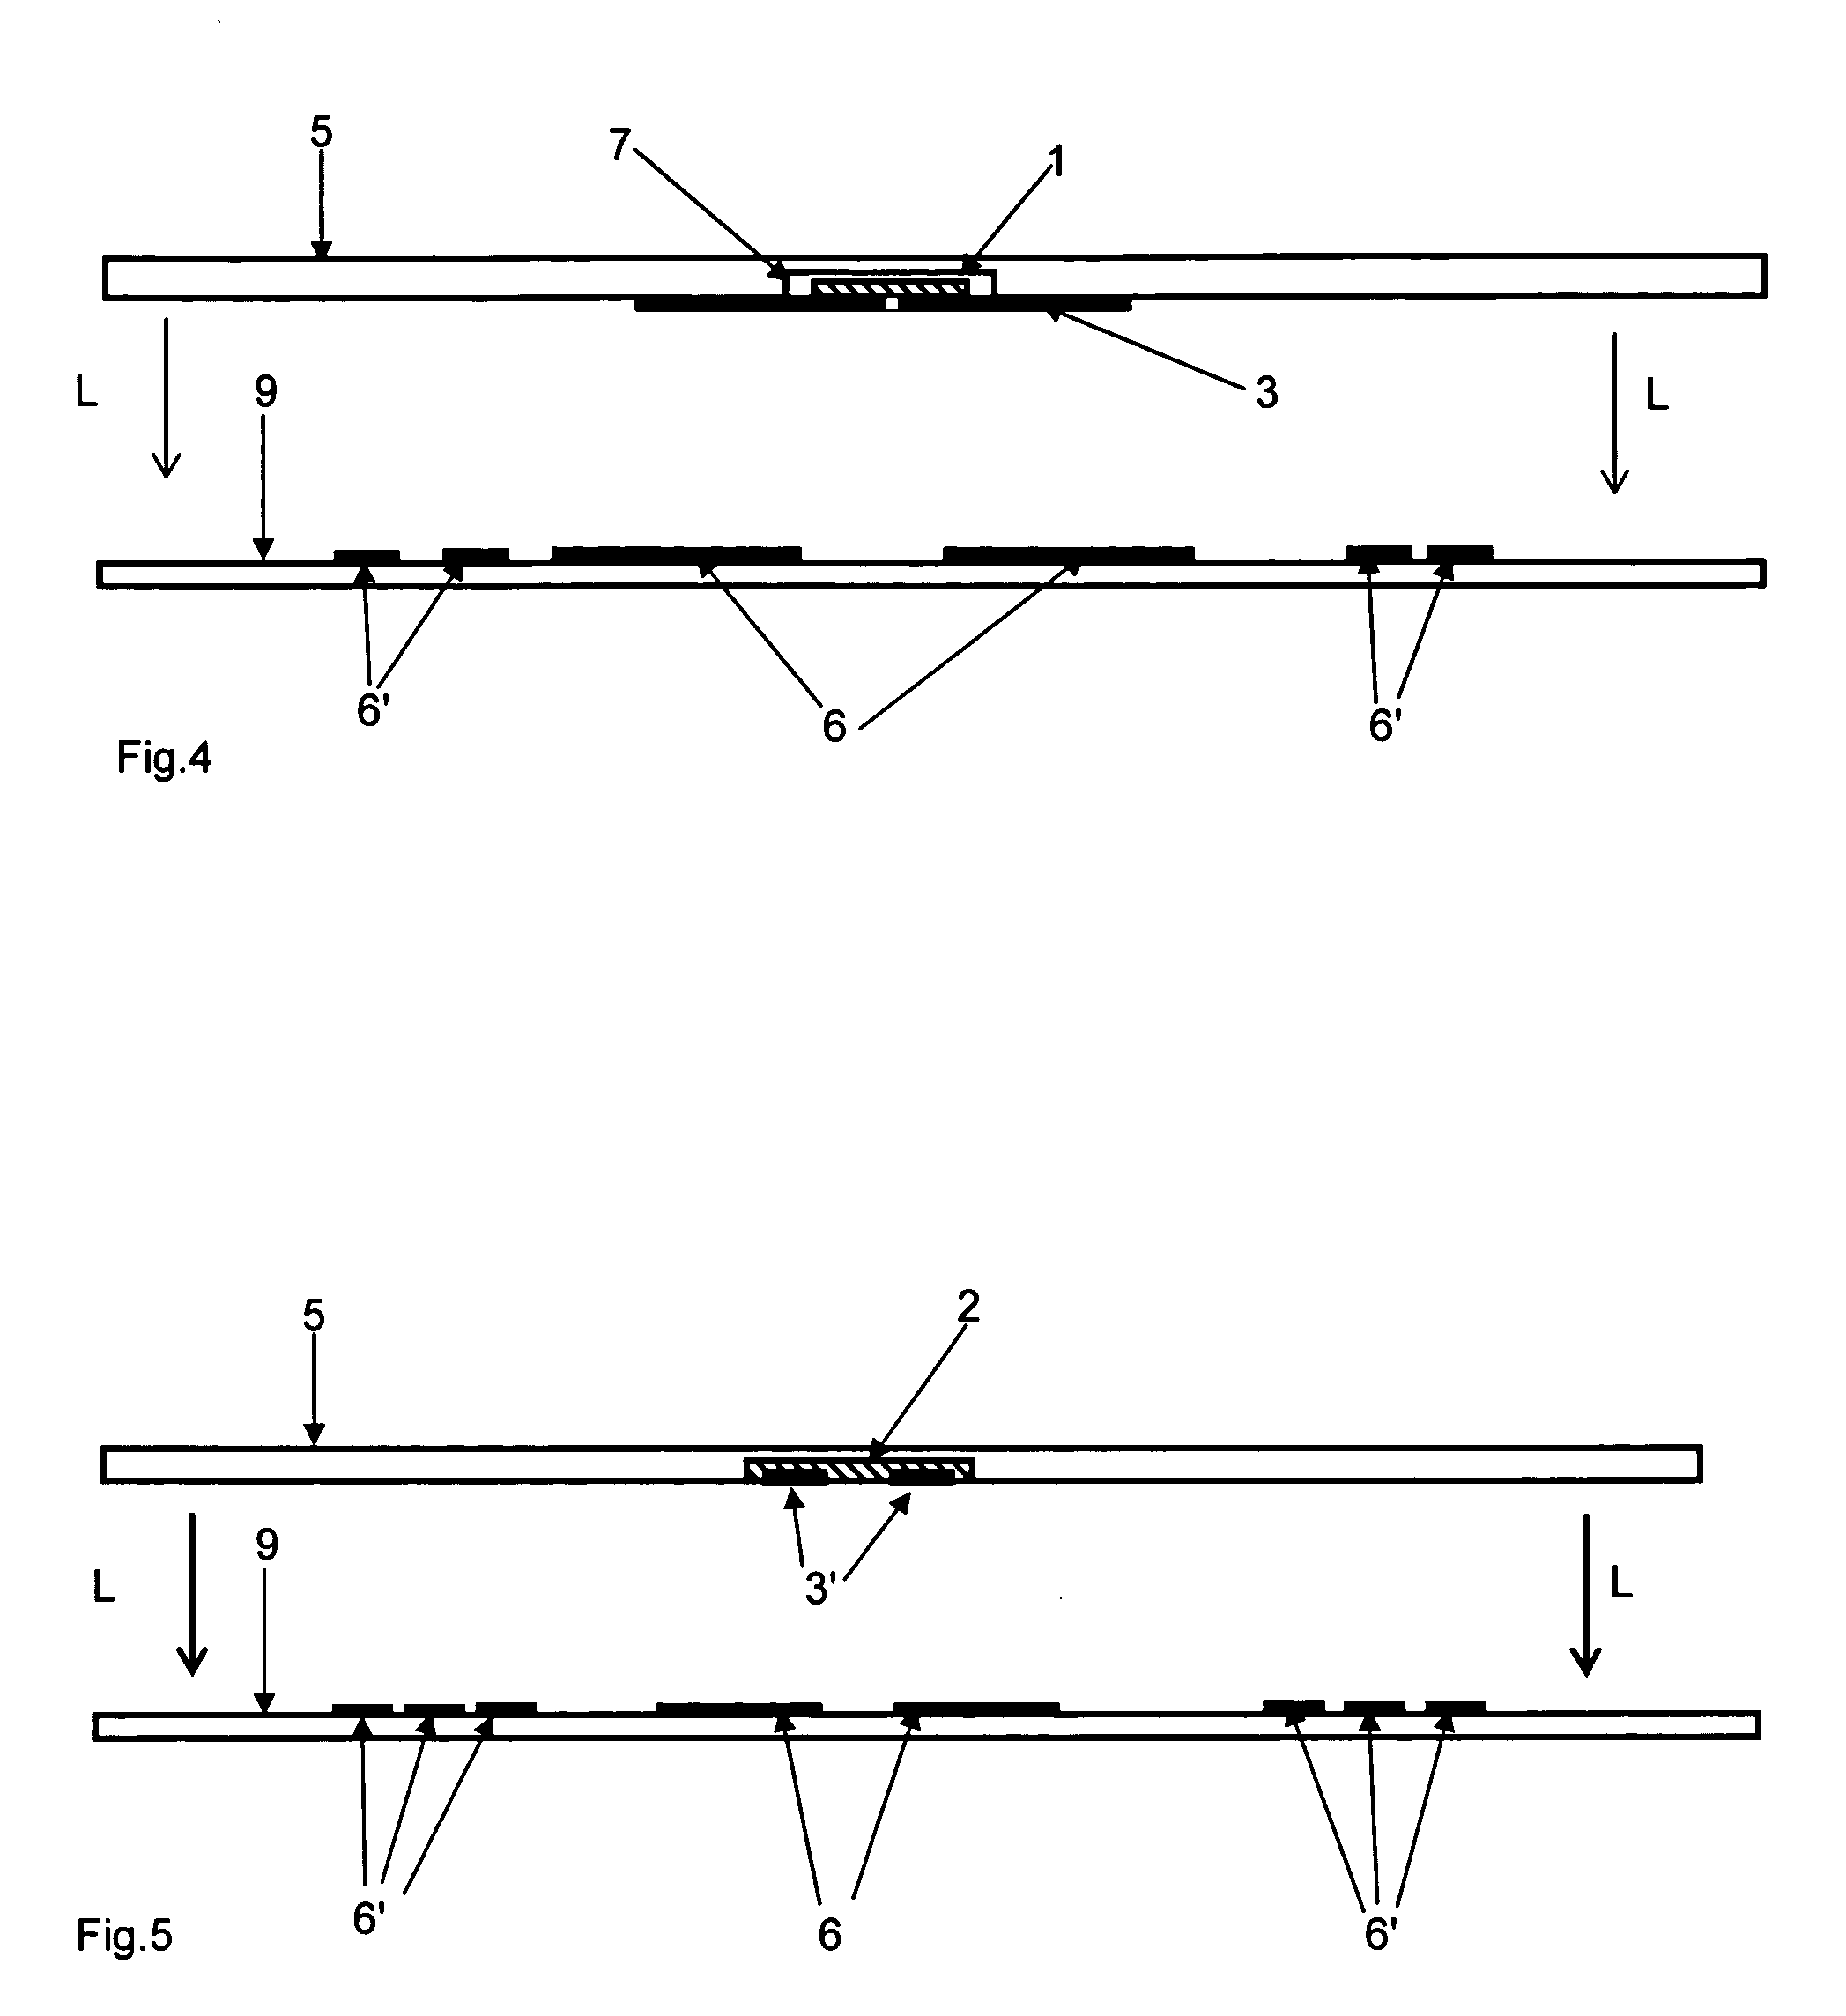 Method for mounting an electronic component on a substrate